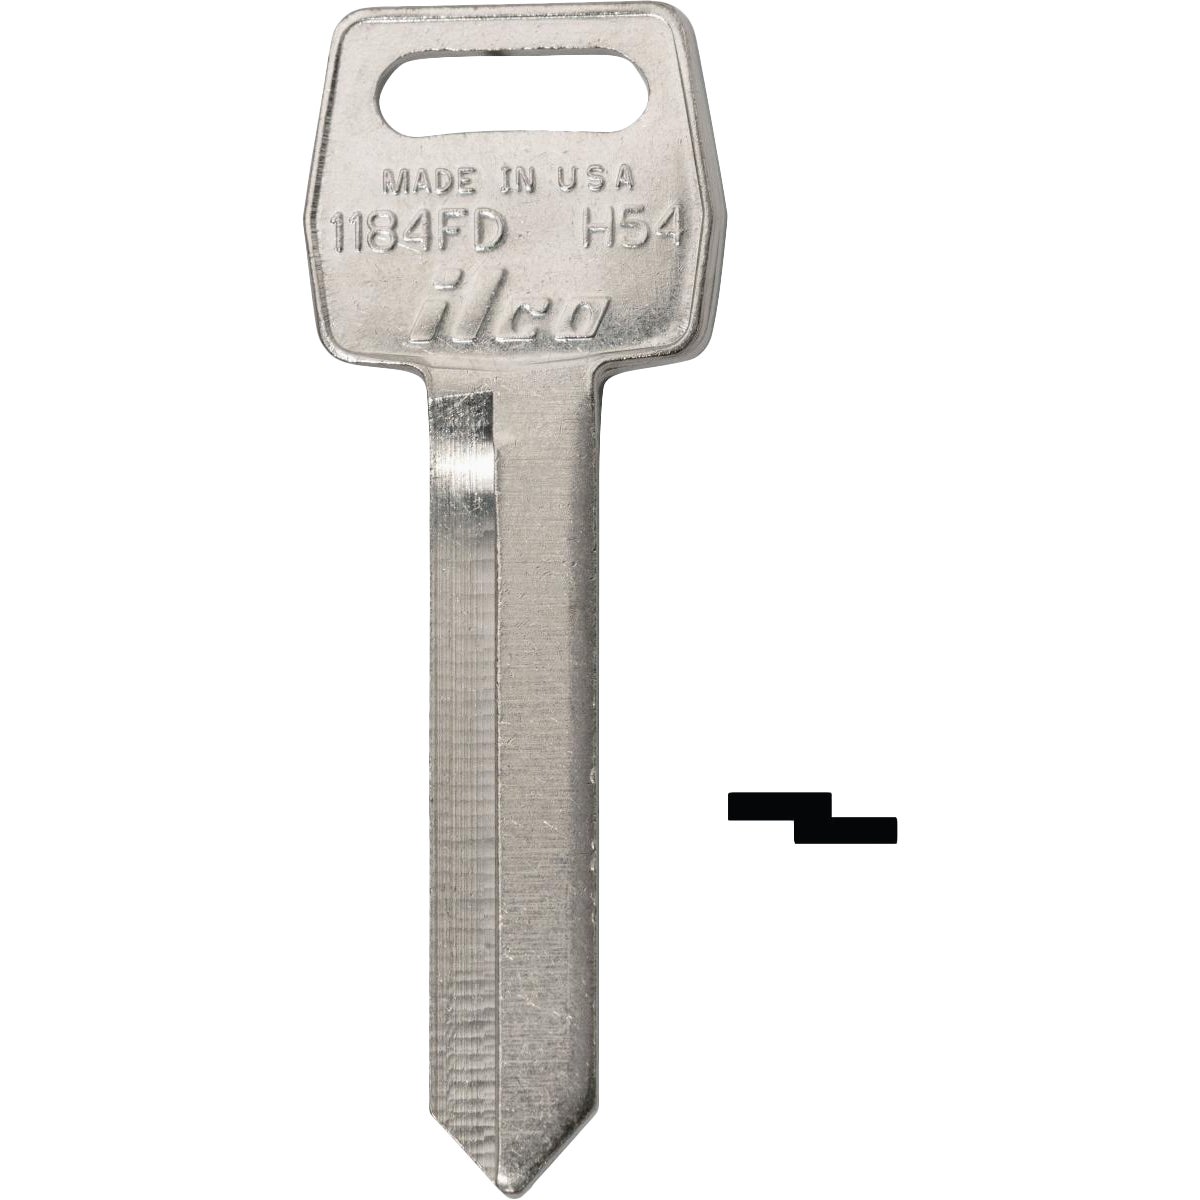 ILCO Ford Nickel Plated Automotive Key, H54 / 1184FD (10-Pack)